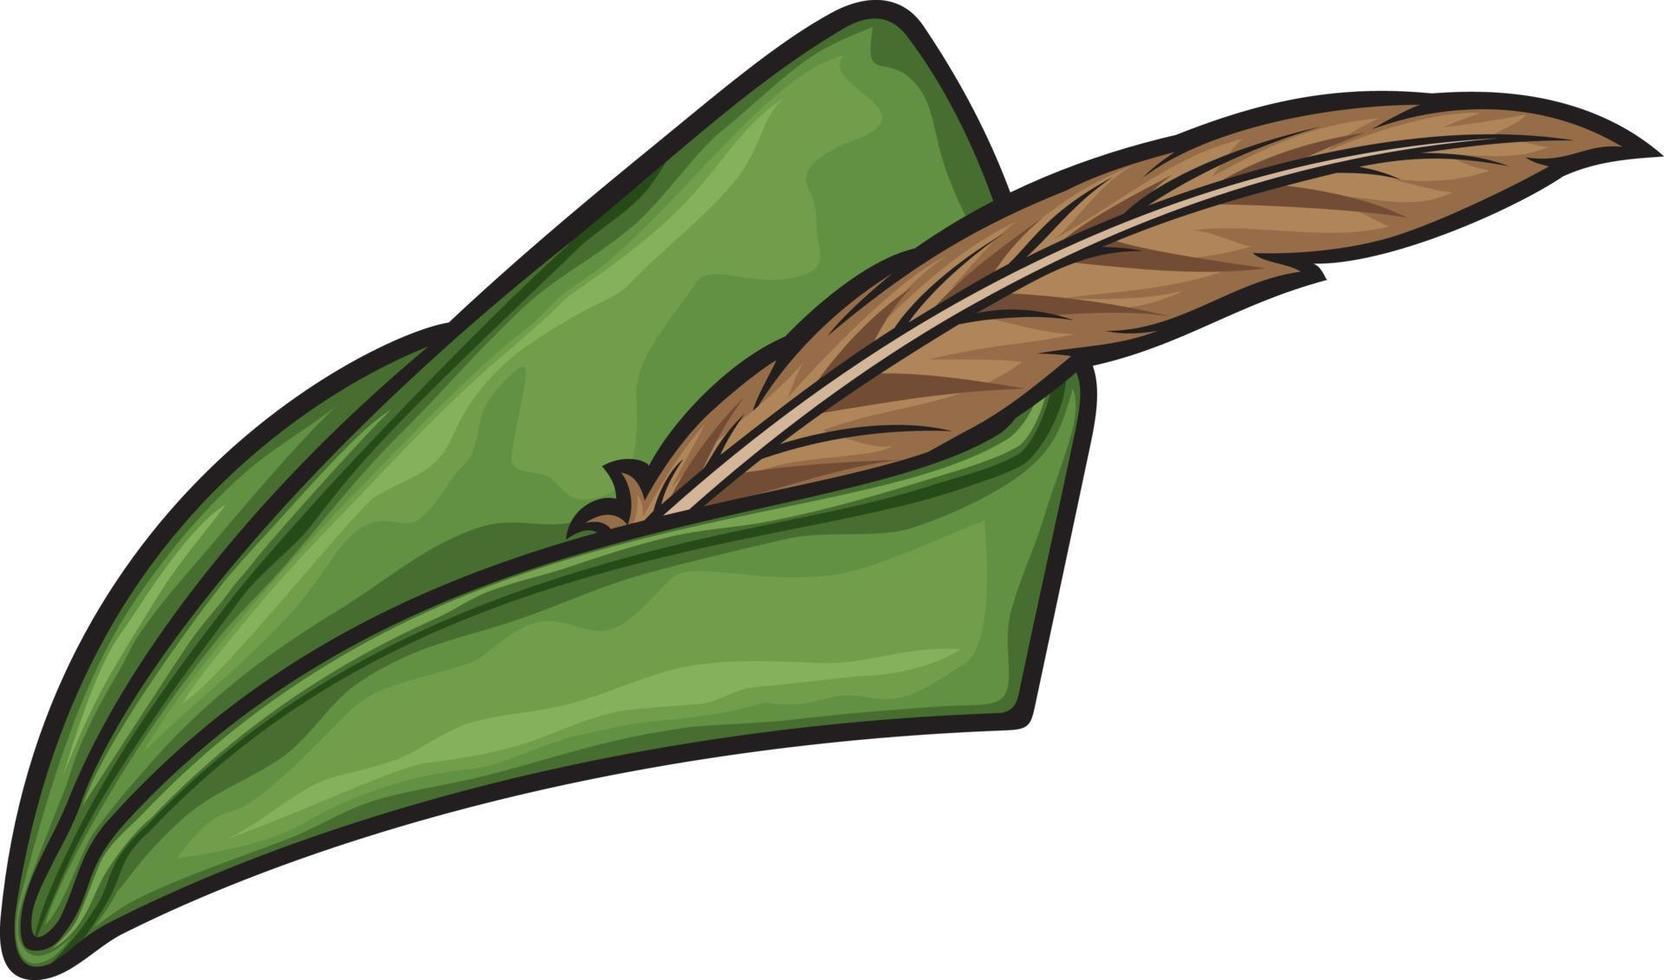 https://static.vecteezy.com/system/resources/previews/003/195/945/non_2x/robin-hood-hat-vector.jpg